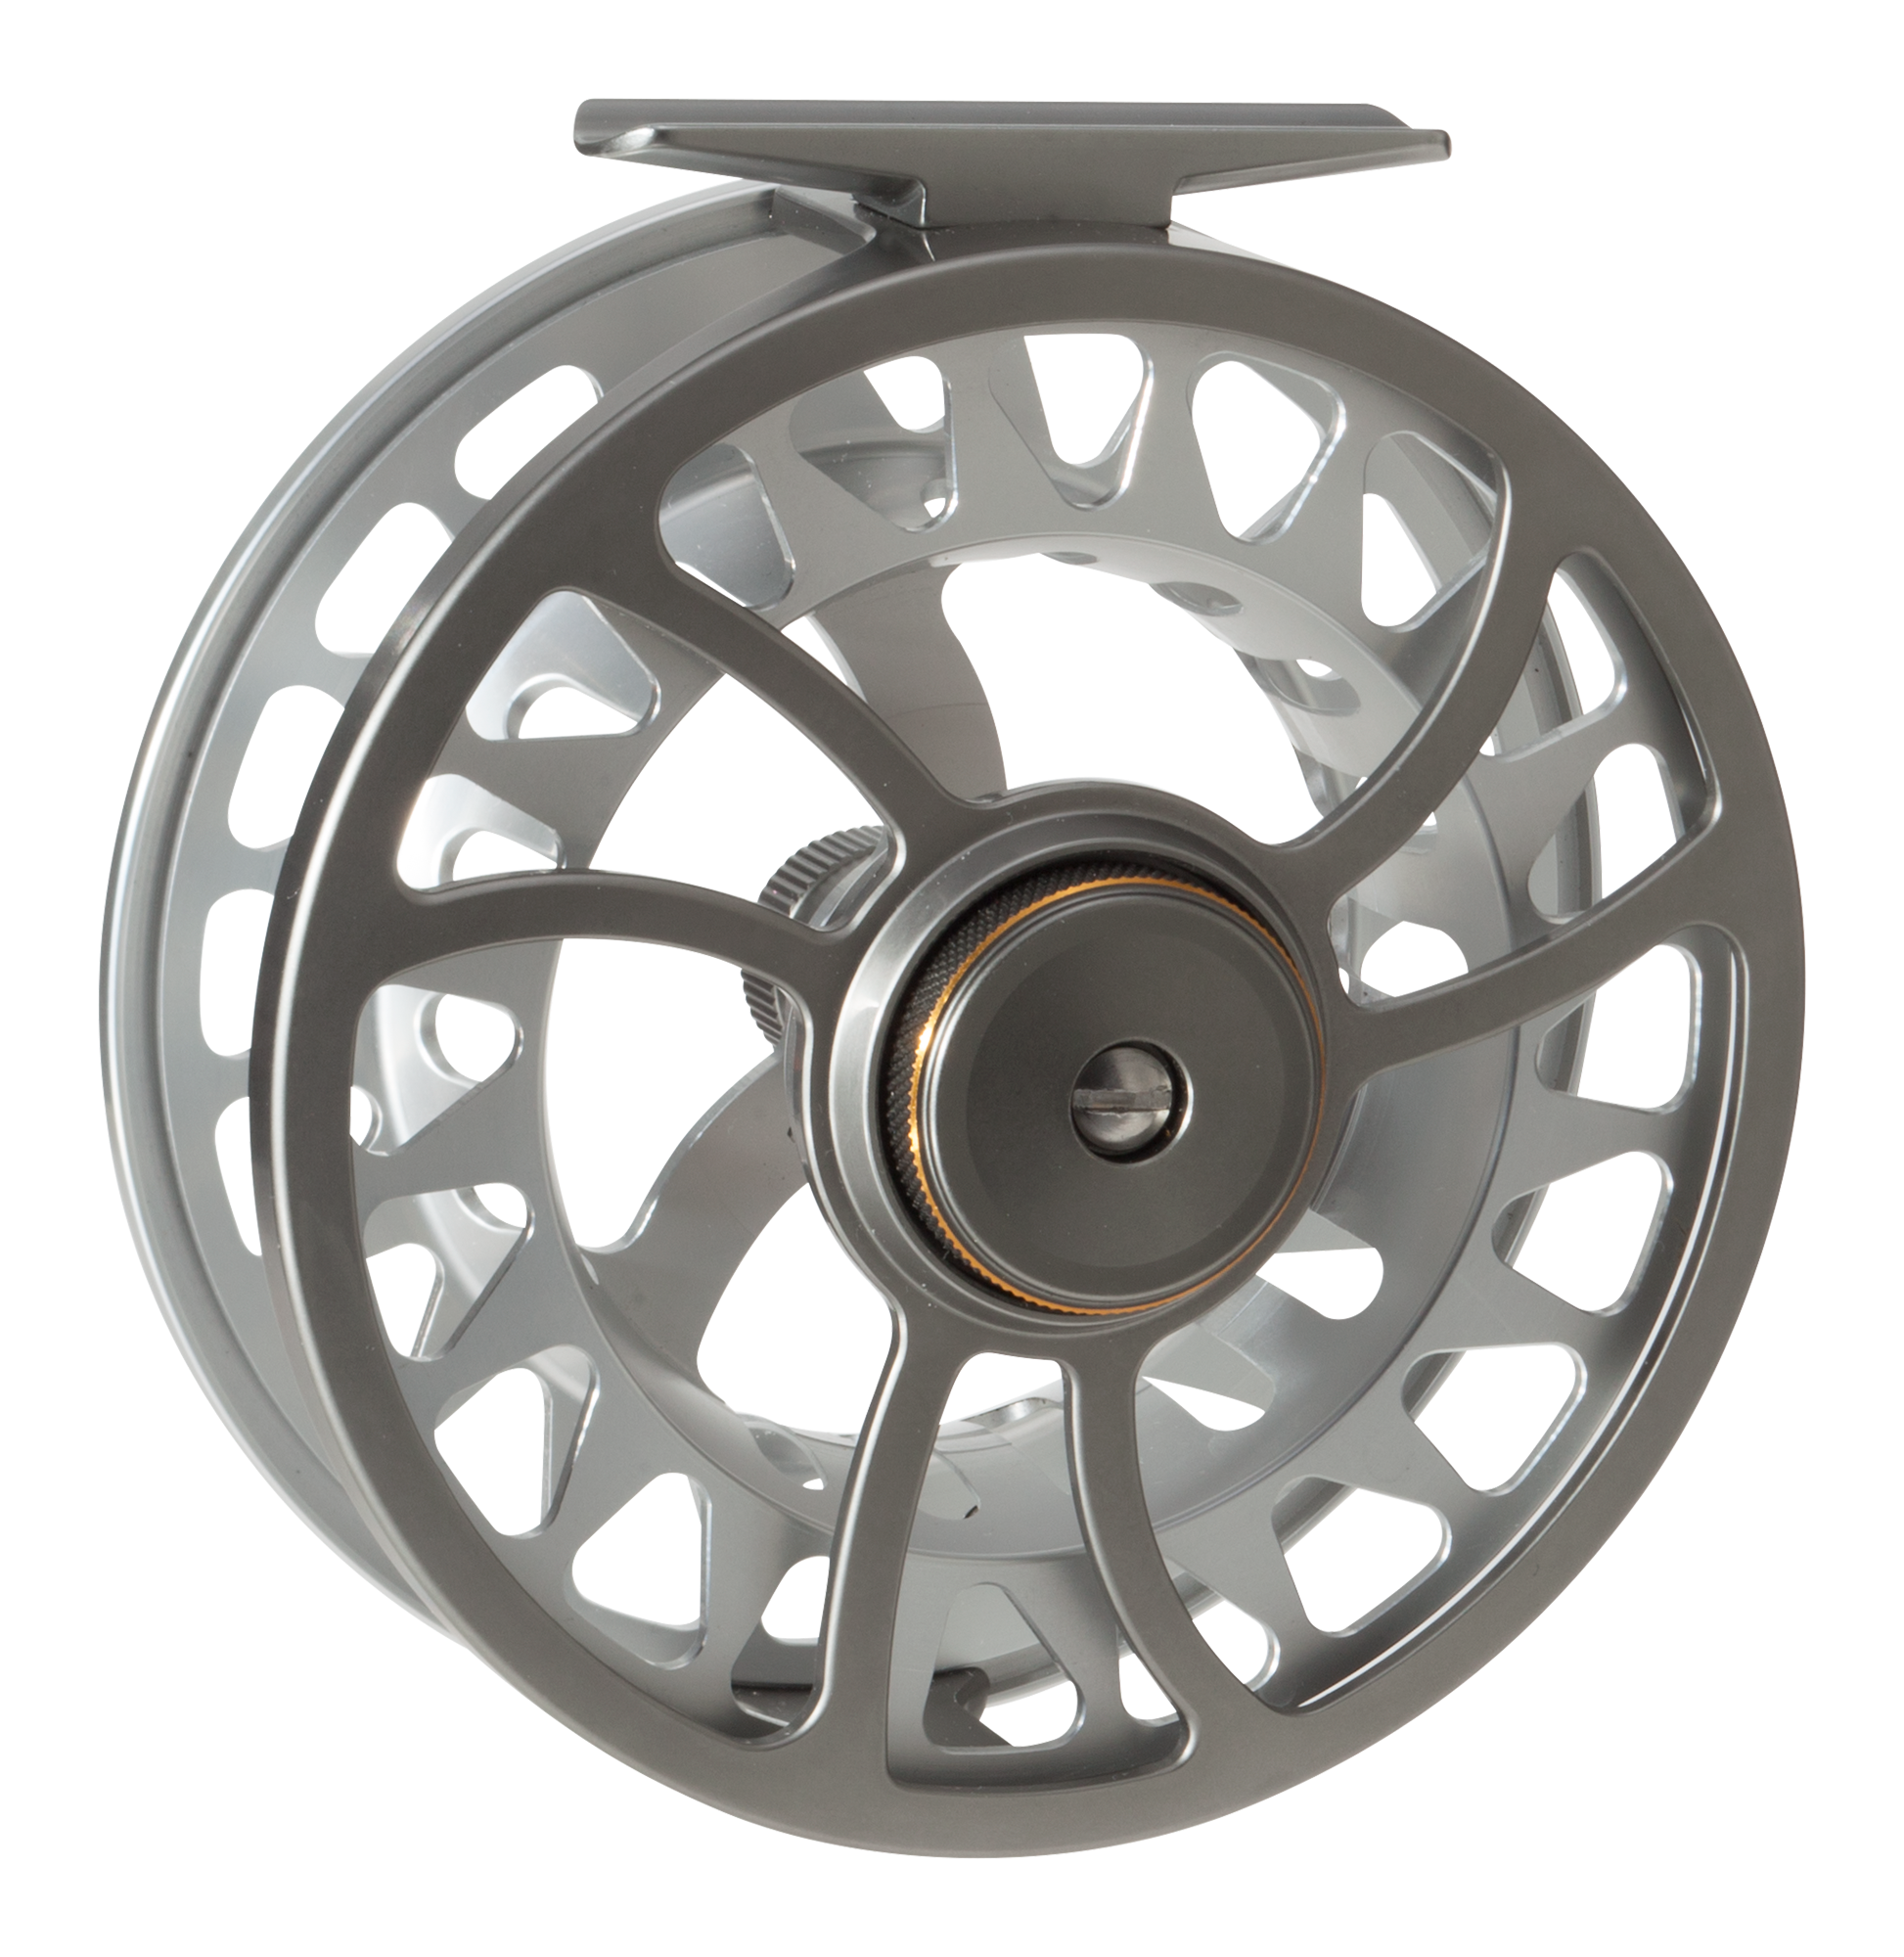  Fly Fishing Reel,Fly Reel Fly Fishing Reel Spare Spool 3 4 5 6  7 8 9 10 WT for Fly Fishing (Color : One Color, Size : Spool 3 4) : Sports  & Outdoors